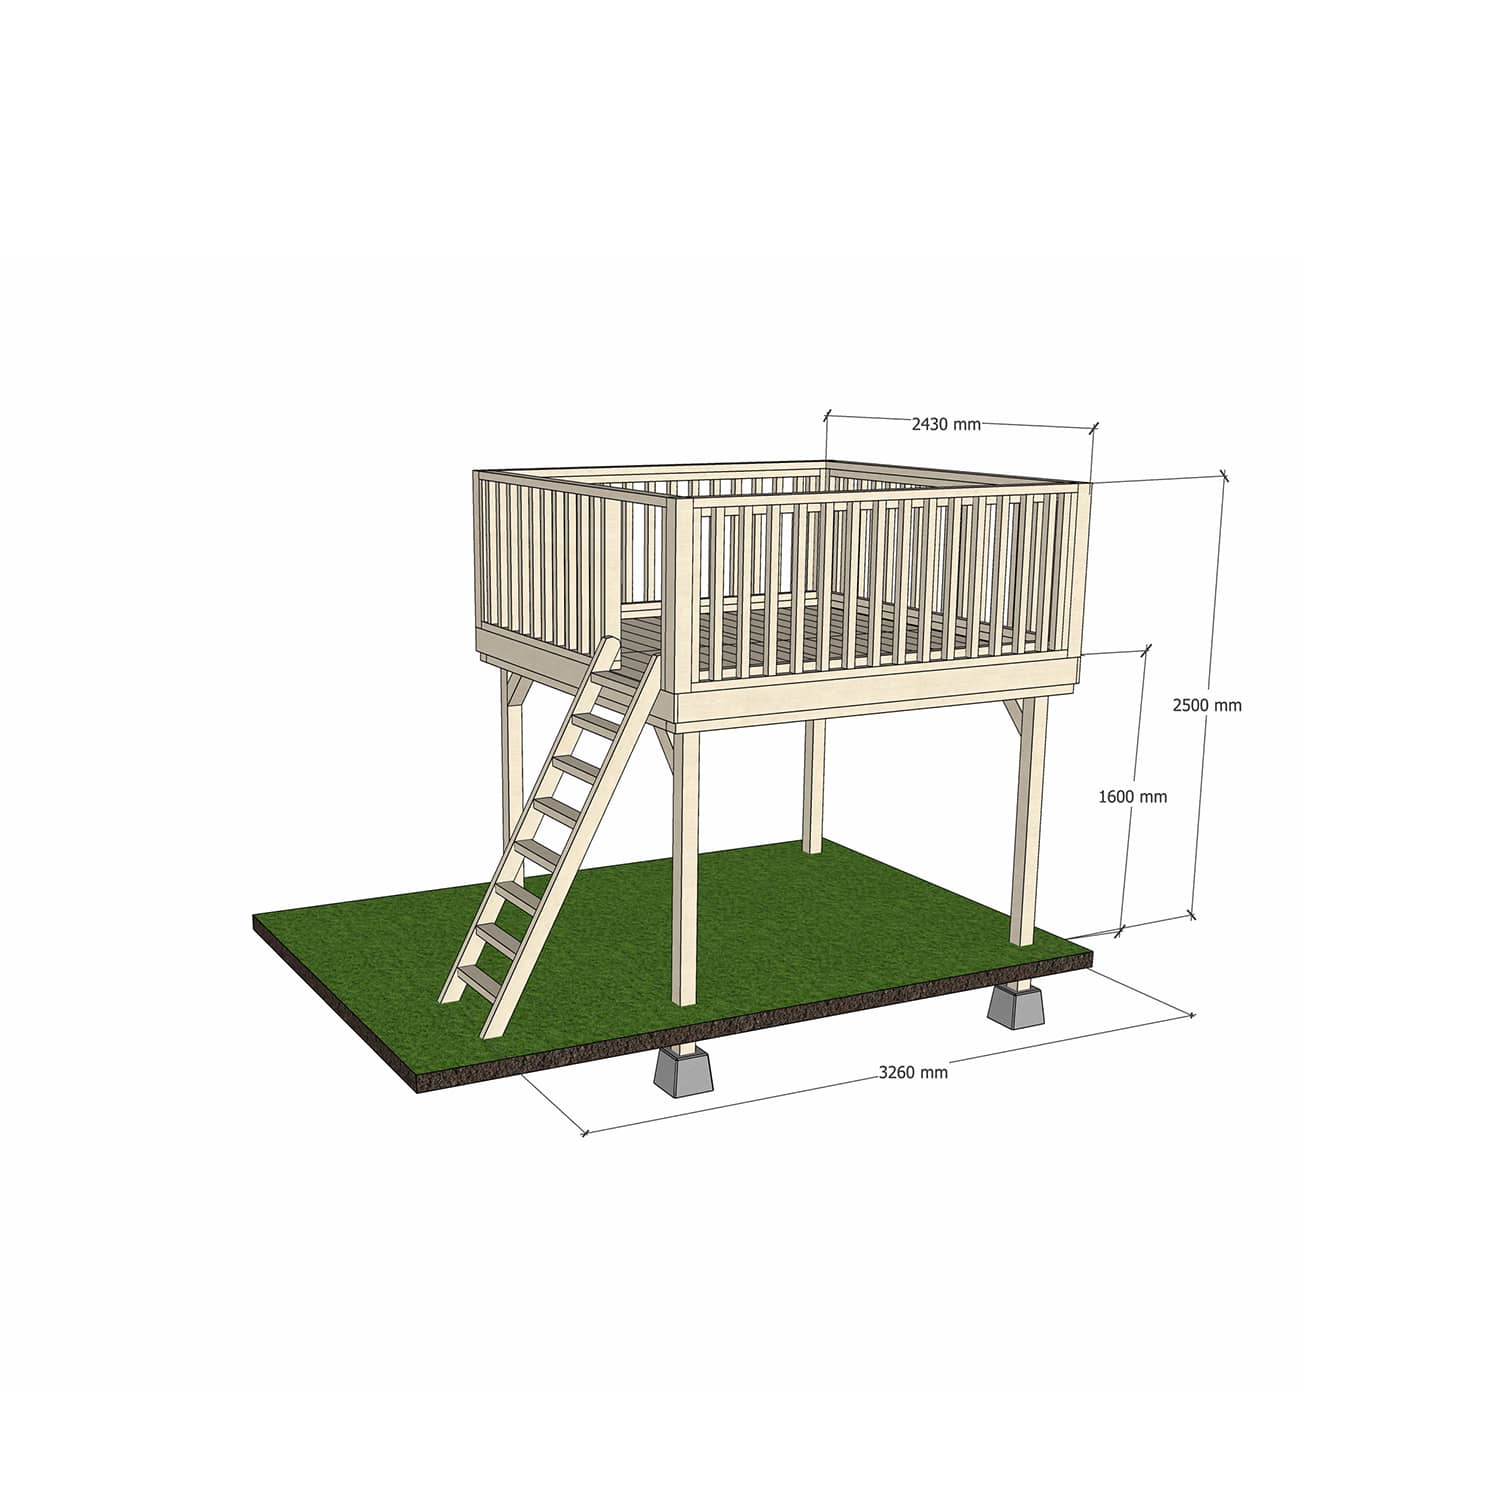 Wooden platform 2400 x 2400mm size with dimensions